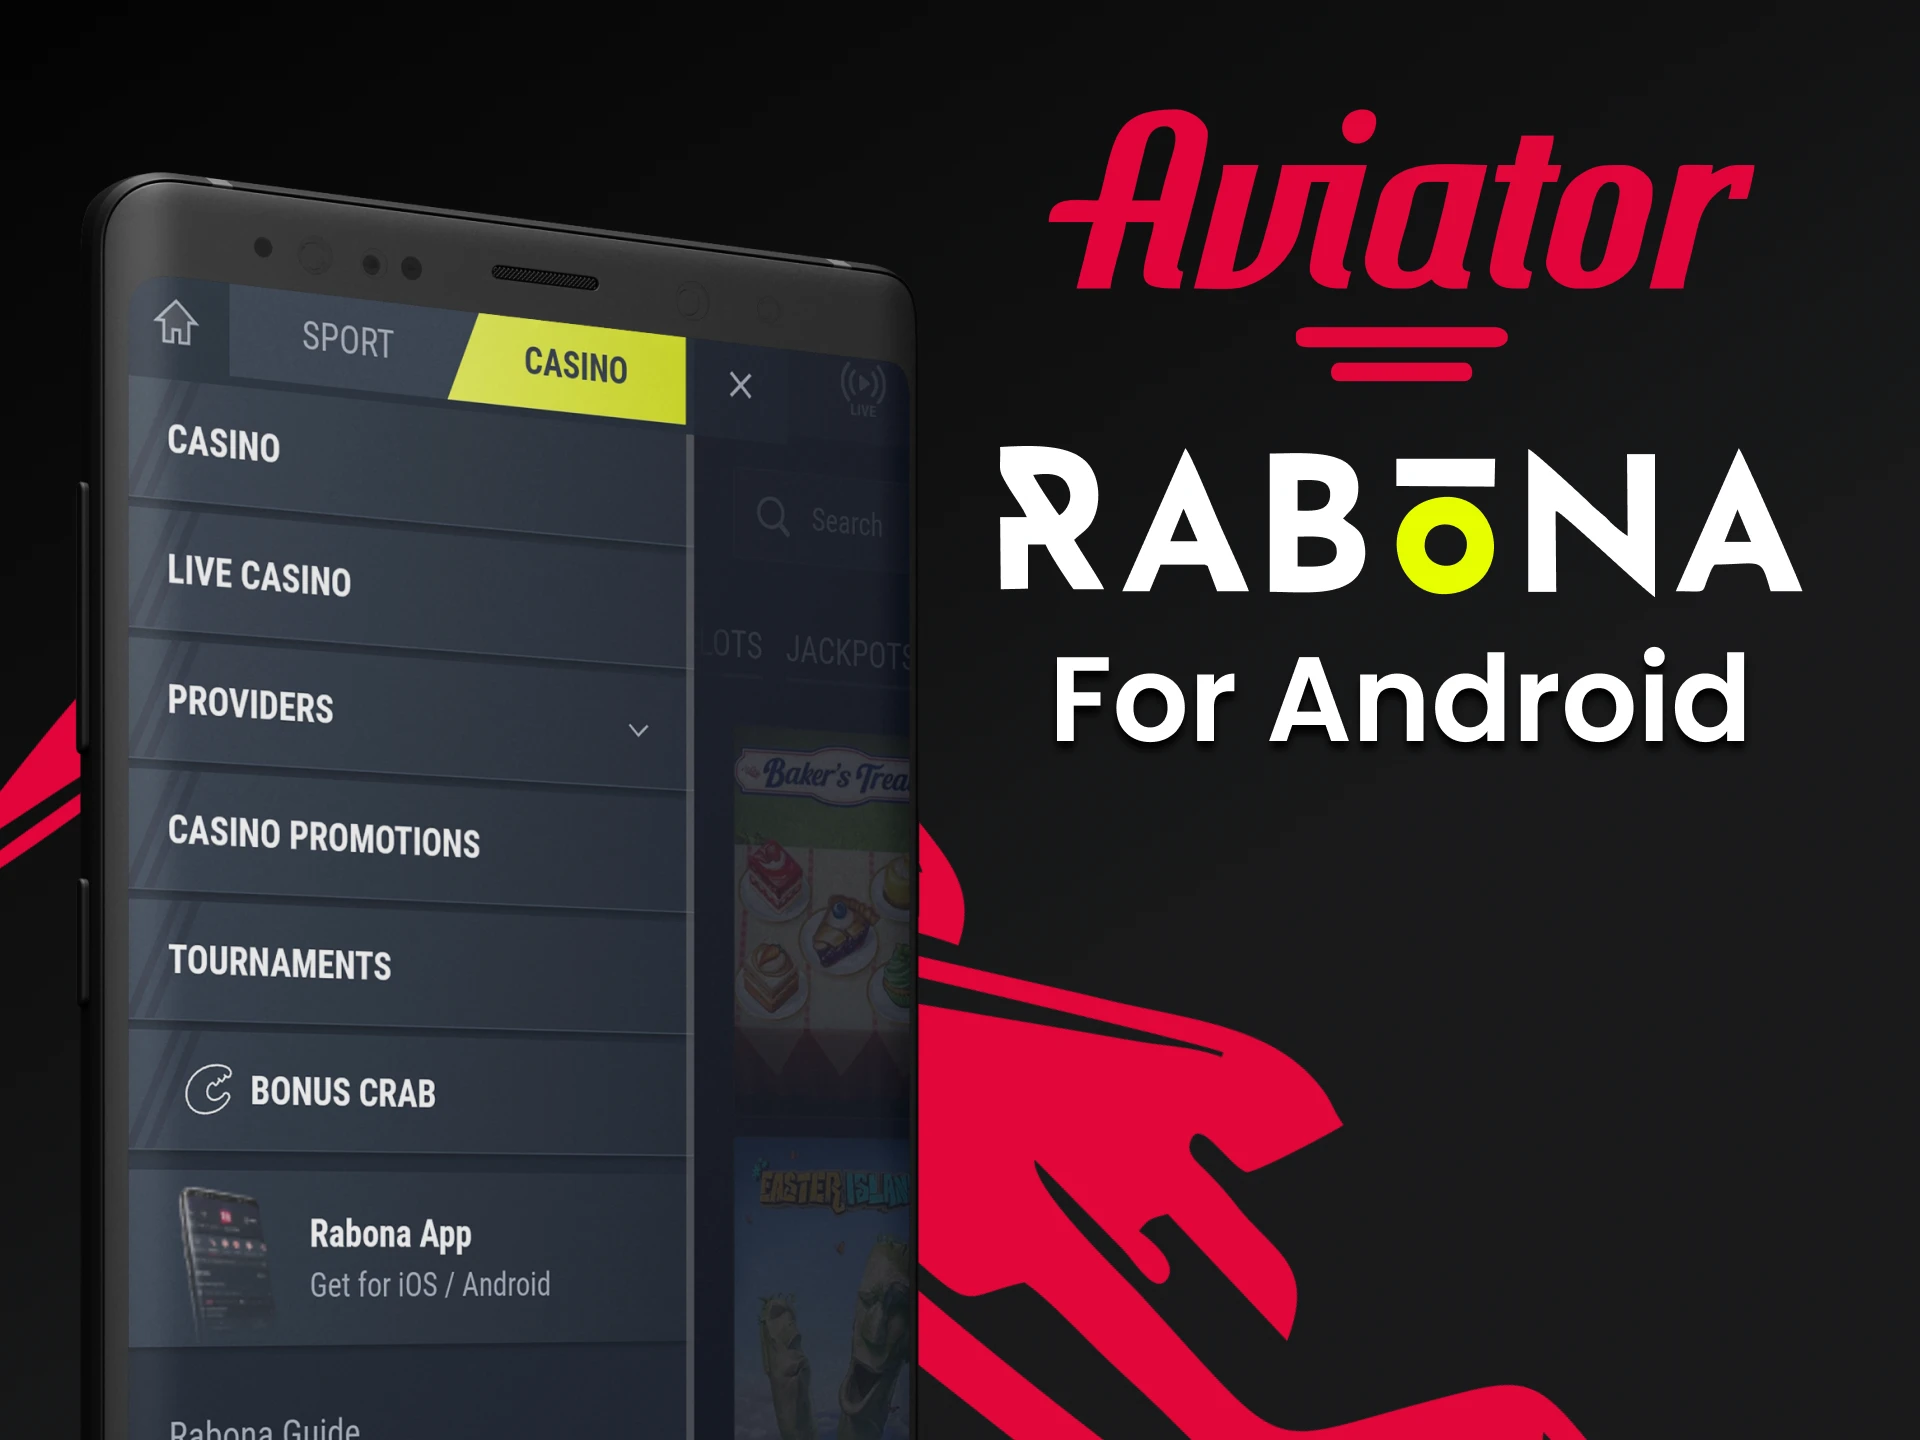 Download the Rabona Android app for Aviator.